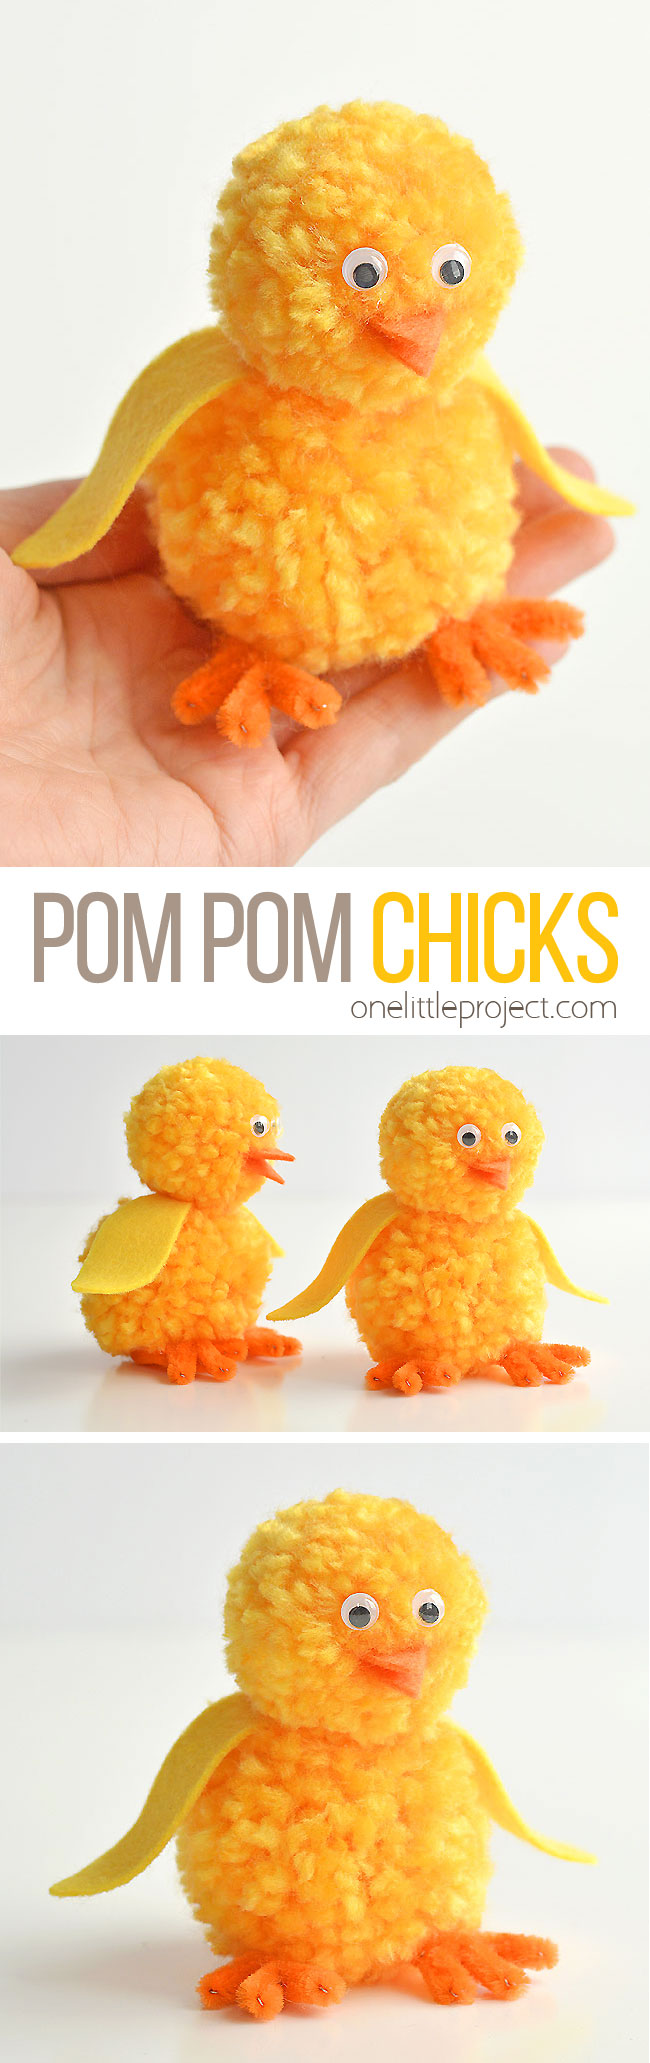 These pom pom chicks are SO CUTE for spring time! This is such a cute Easter craft idea for kids! They'd look super cute as a decoration on the Easter table, or just a festive spring craft to make with the kids on a rainy day. You don't need any special tools to make the DIY pom poms, just your hands! Each one takes about 15 minutes to make using simple craft supplies. The kids will love playing with them when you're done!